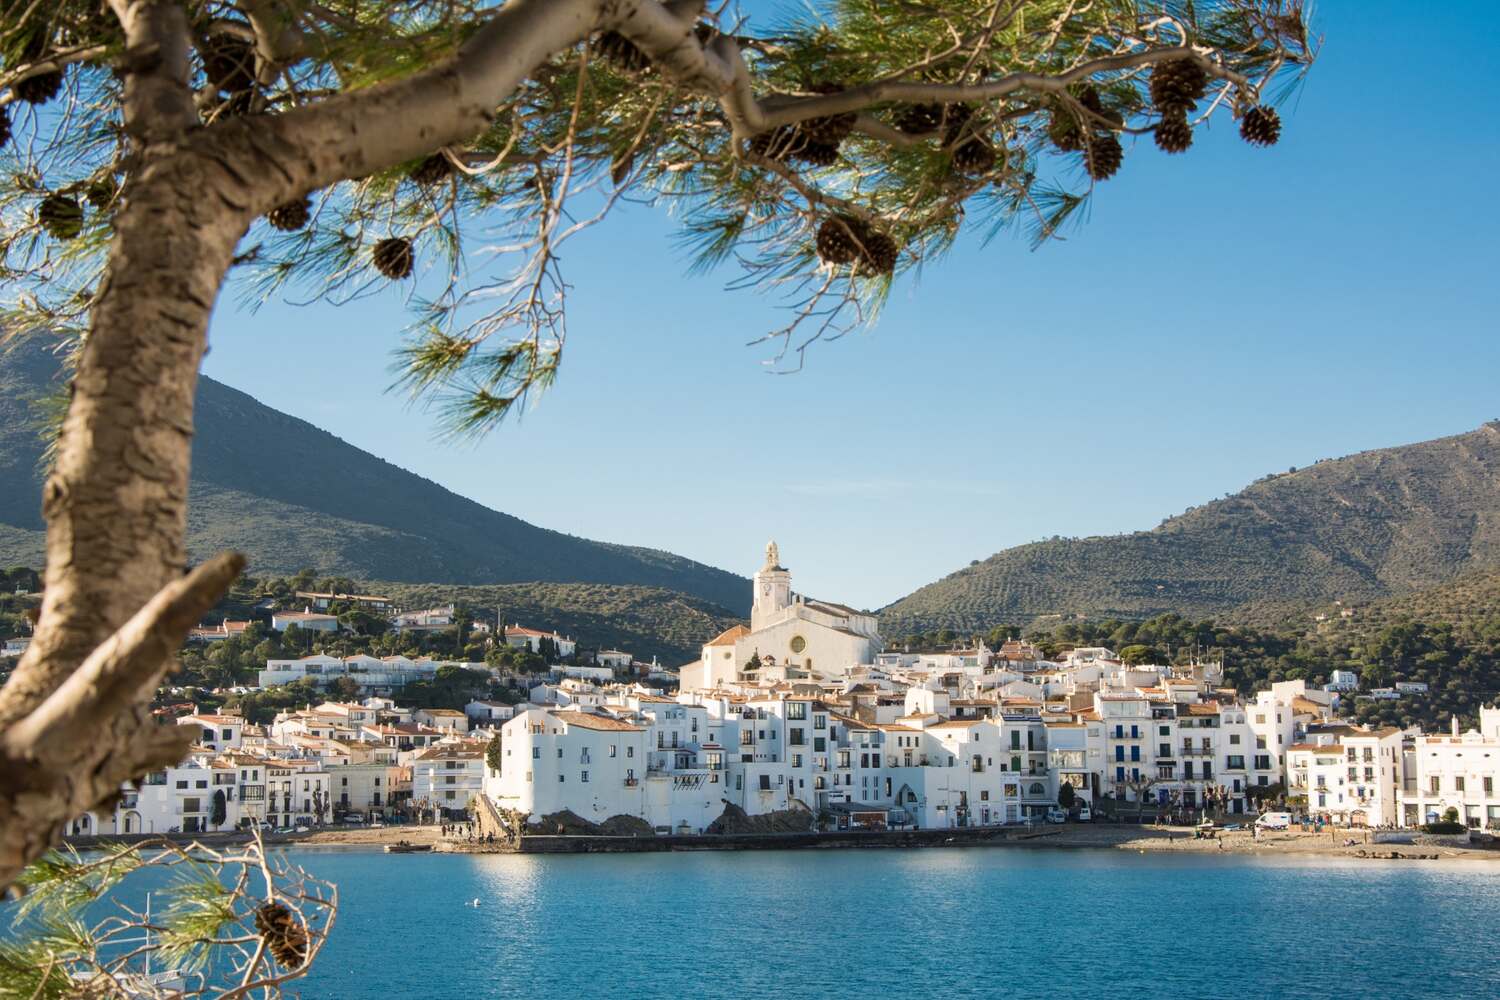 Aerial view of Cadaqués, Spain, showing white houses along the Mediterranean coast.